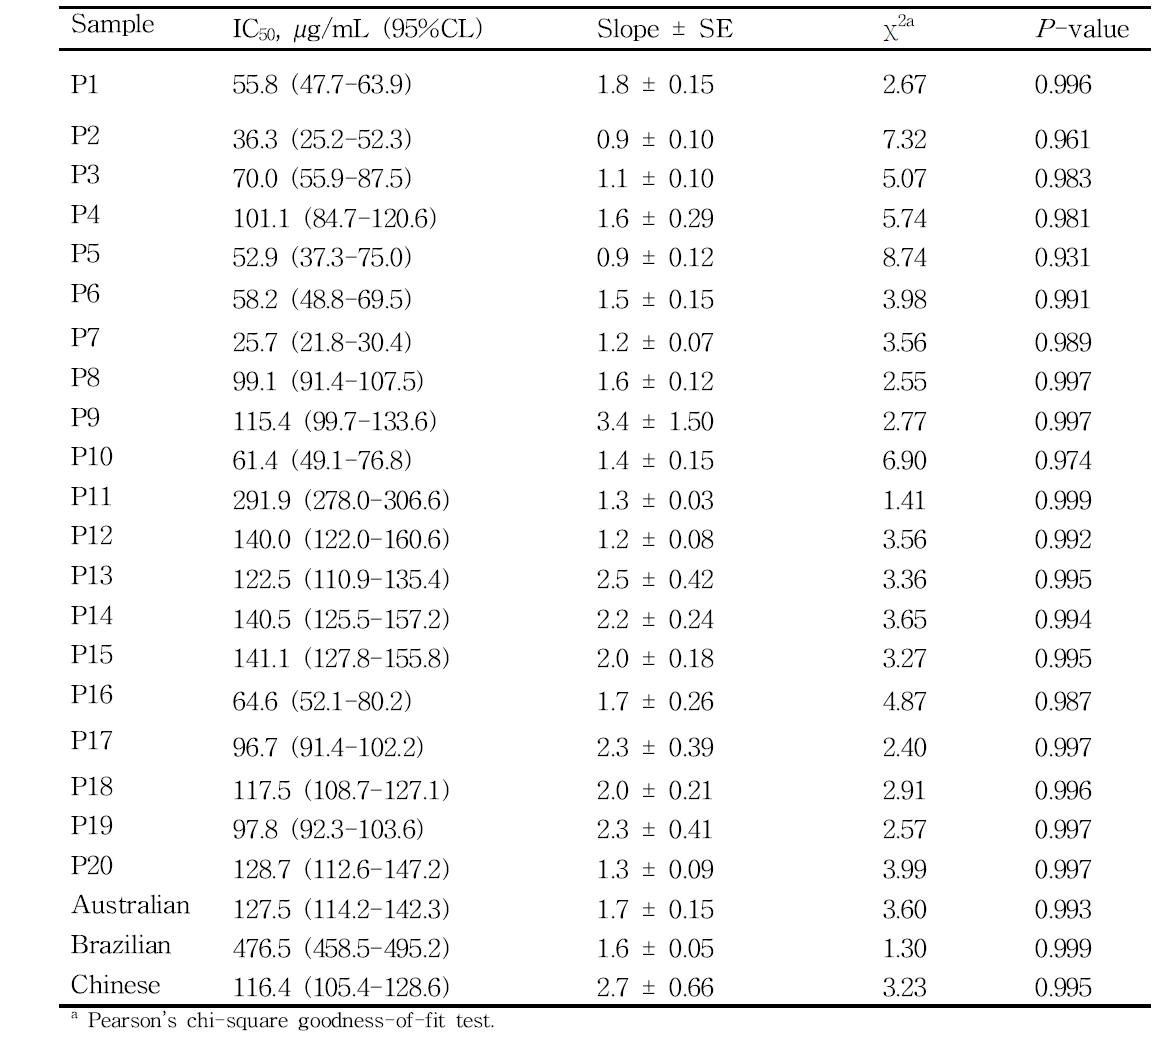 BACE-1 inhibitory activity of 20 Korean, Australian, Brazilian, and Chinese propolis ethanol extracts